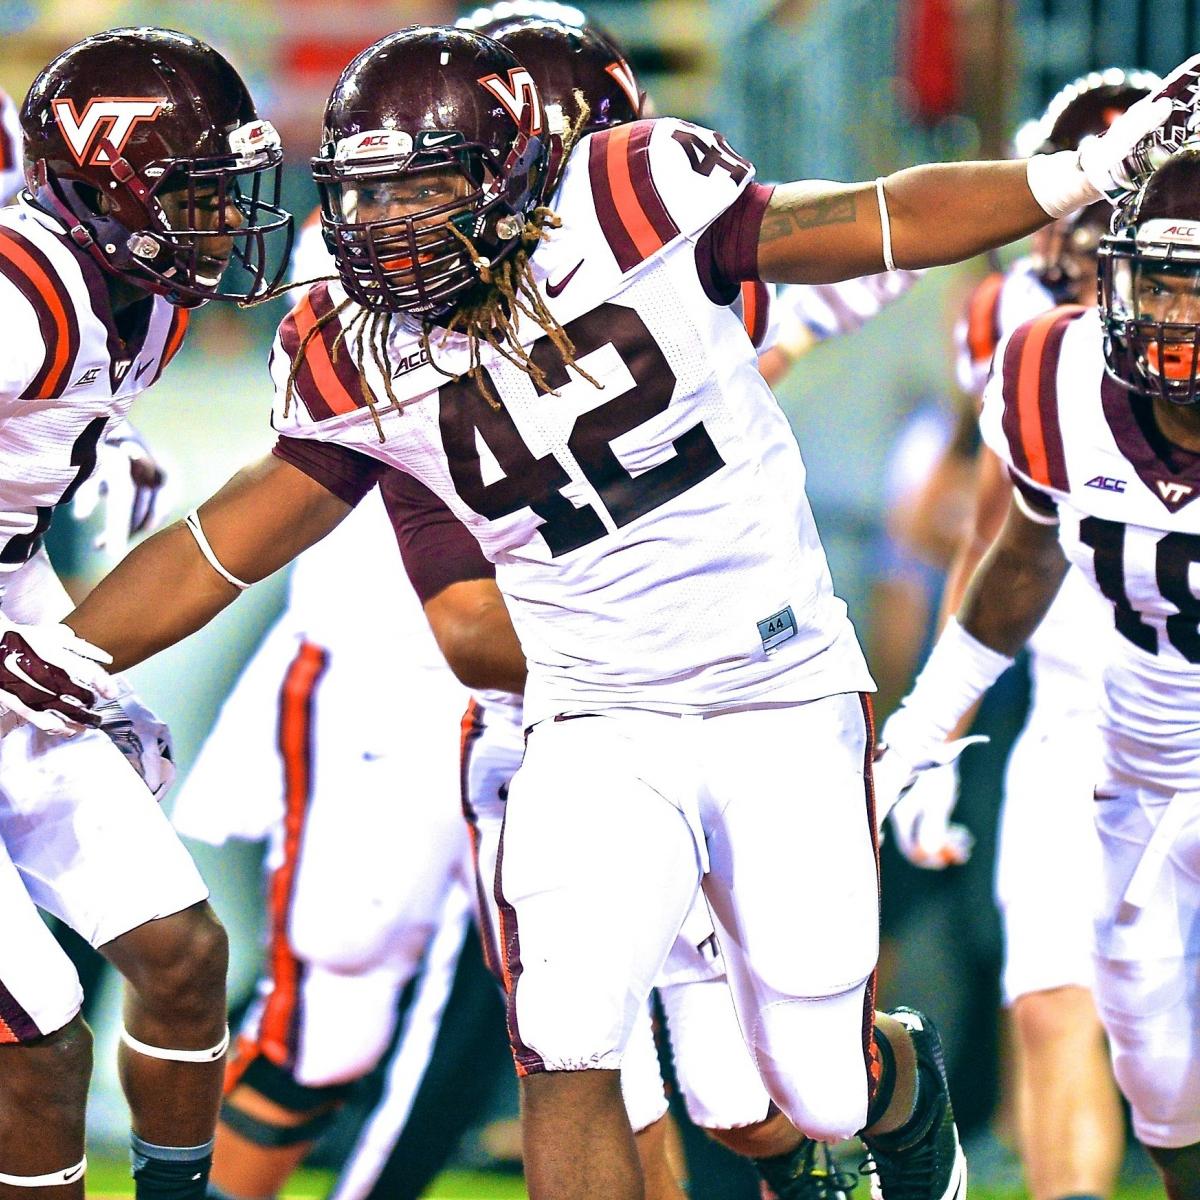 Virginia Tech vs. Ohio State Live Score and Highlights News, Scores